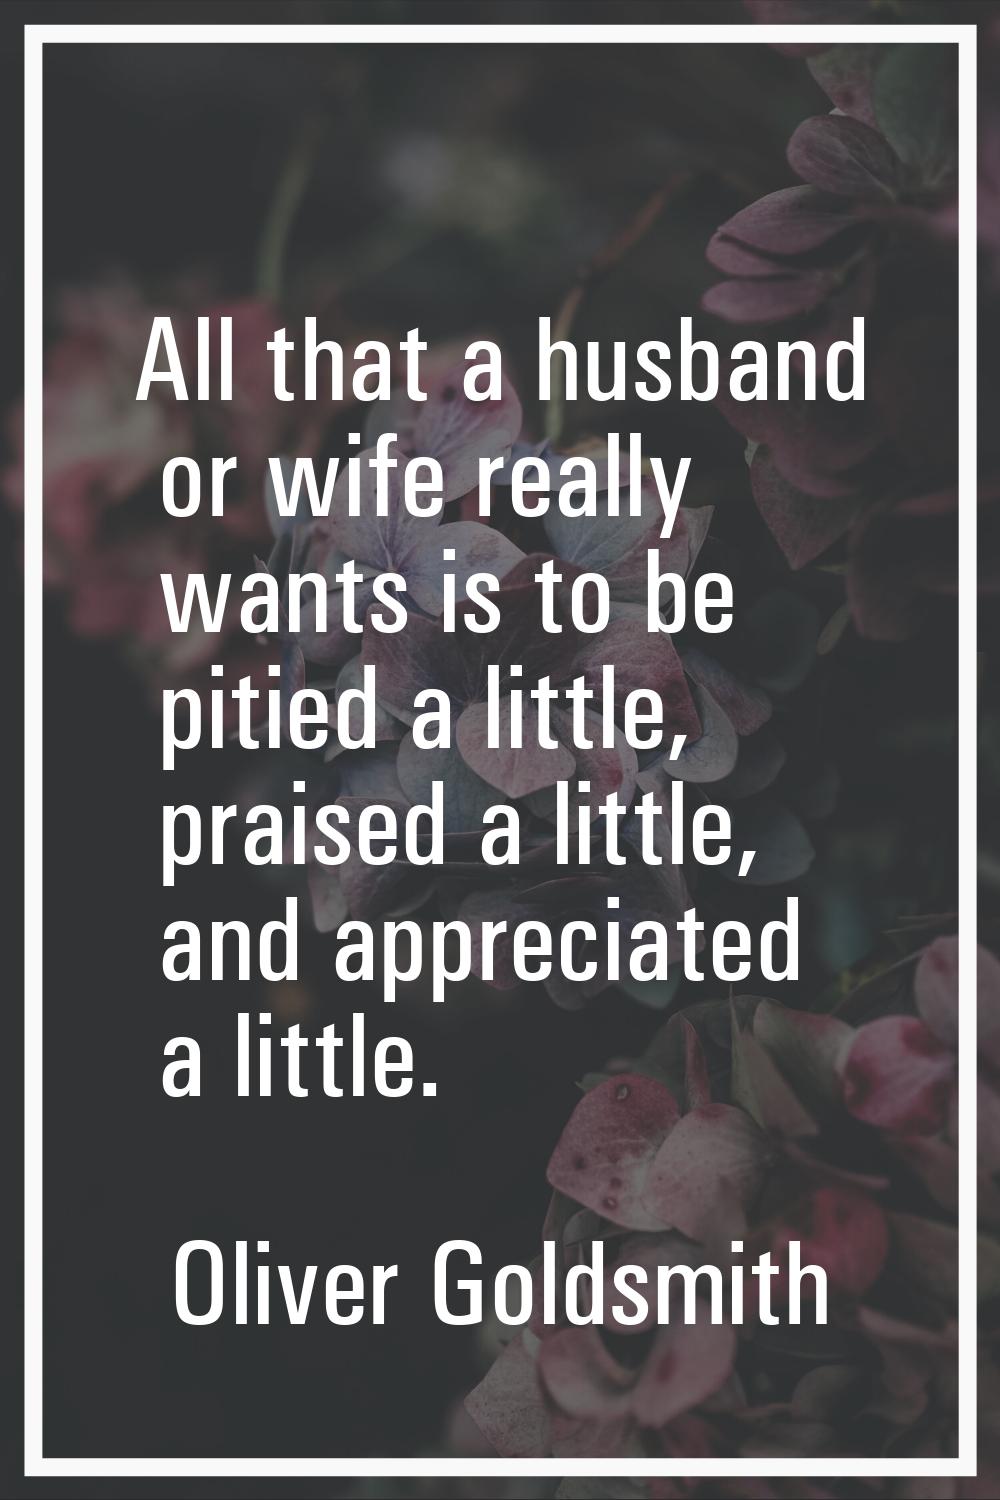 All that a husband or wife really wants is to be pitied a little, praised a little, and appreciated